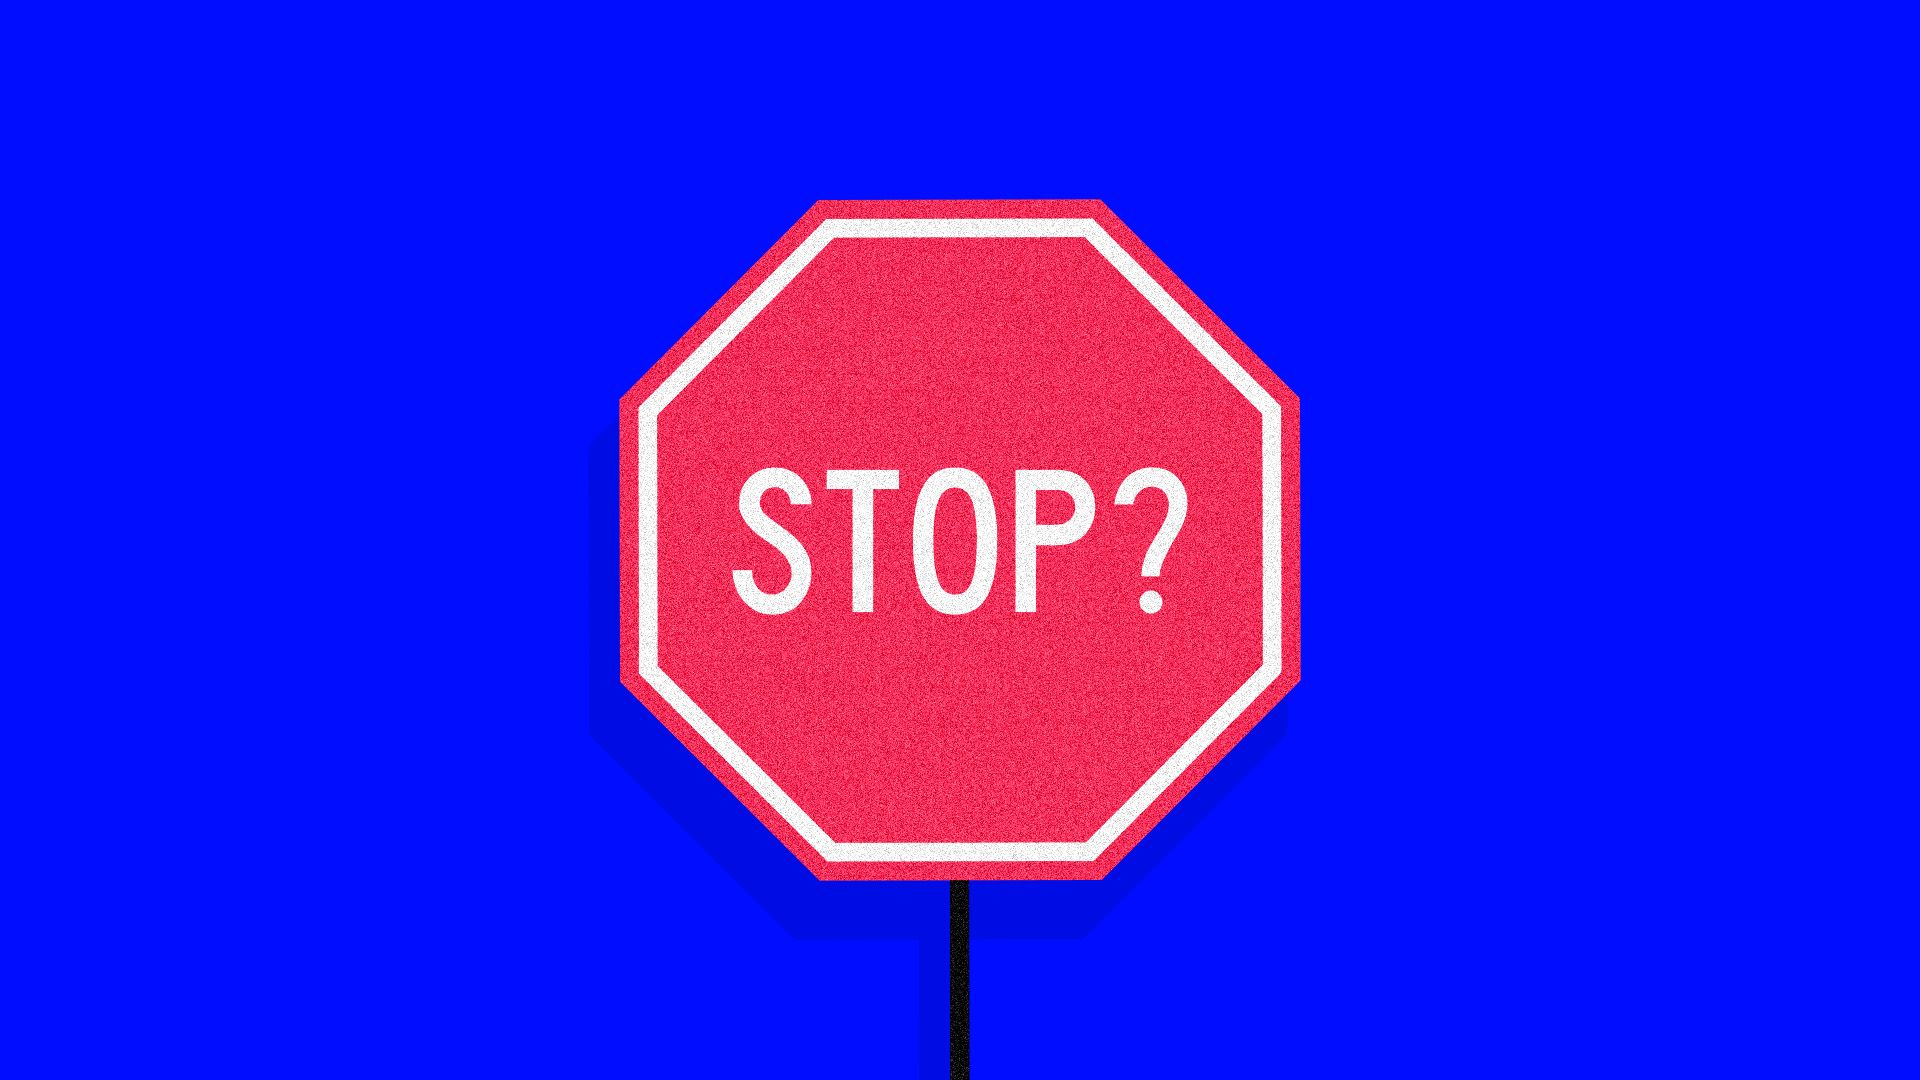 Illustration of "Stop?" sign